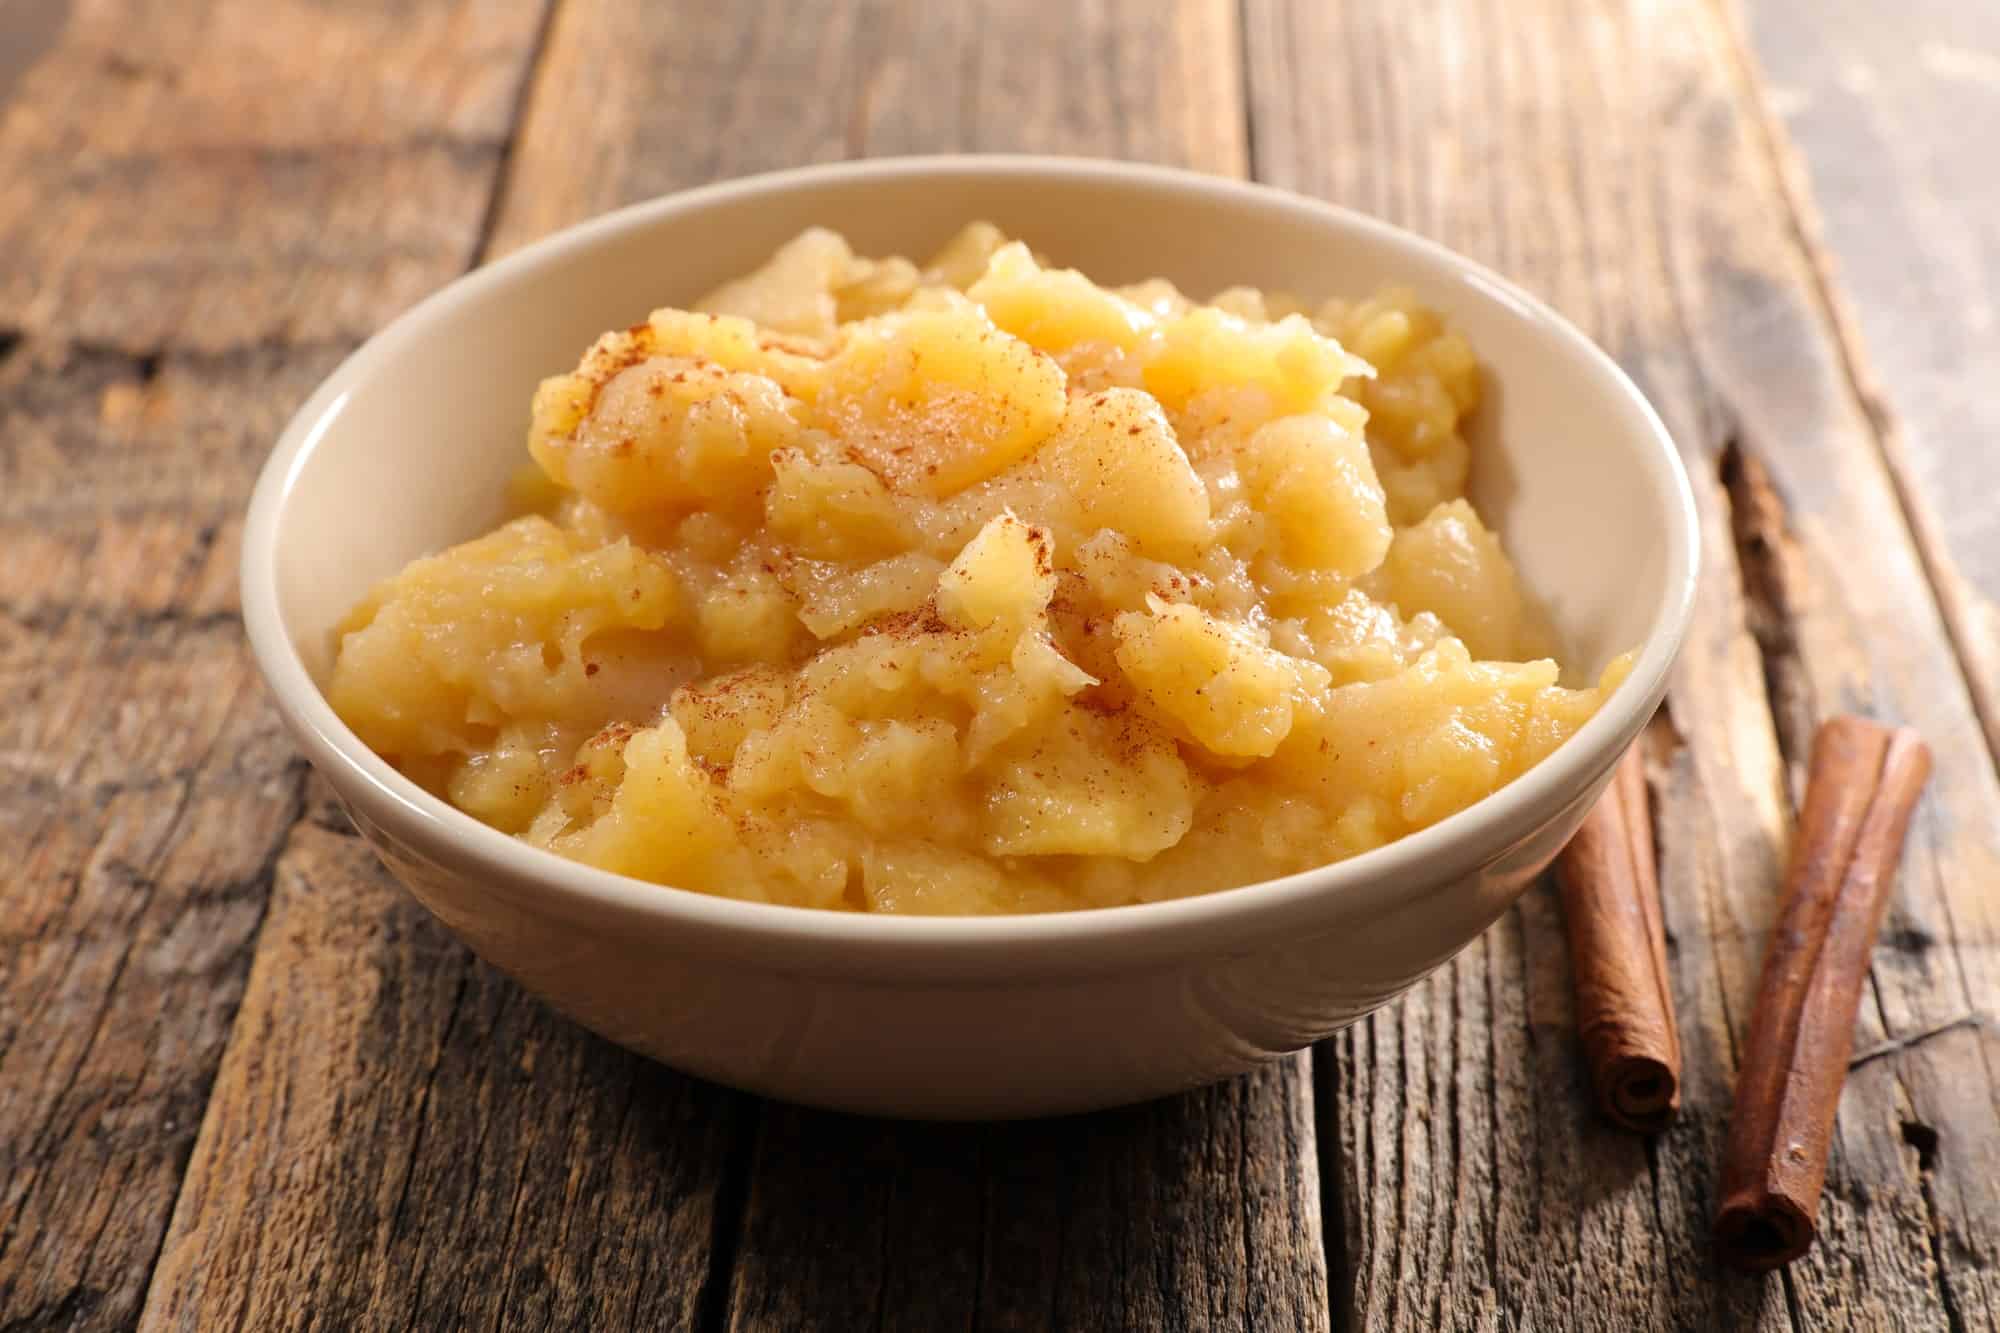 Homemade chunky applesauce is delicious and comforting - a perfect side dish. Grab the recipe at Made in a Pinch and follow us on Pinterest for more recipes and helpful tips!2